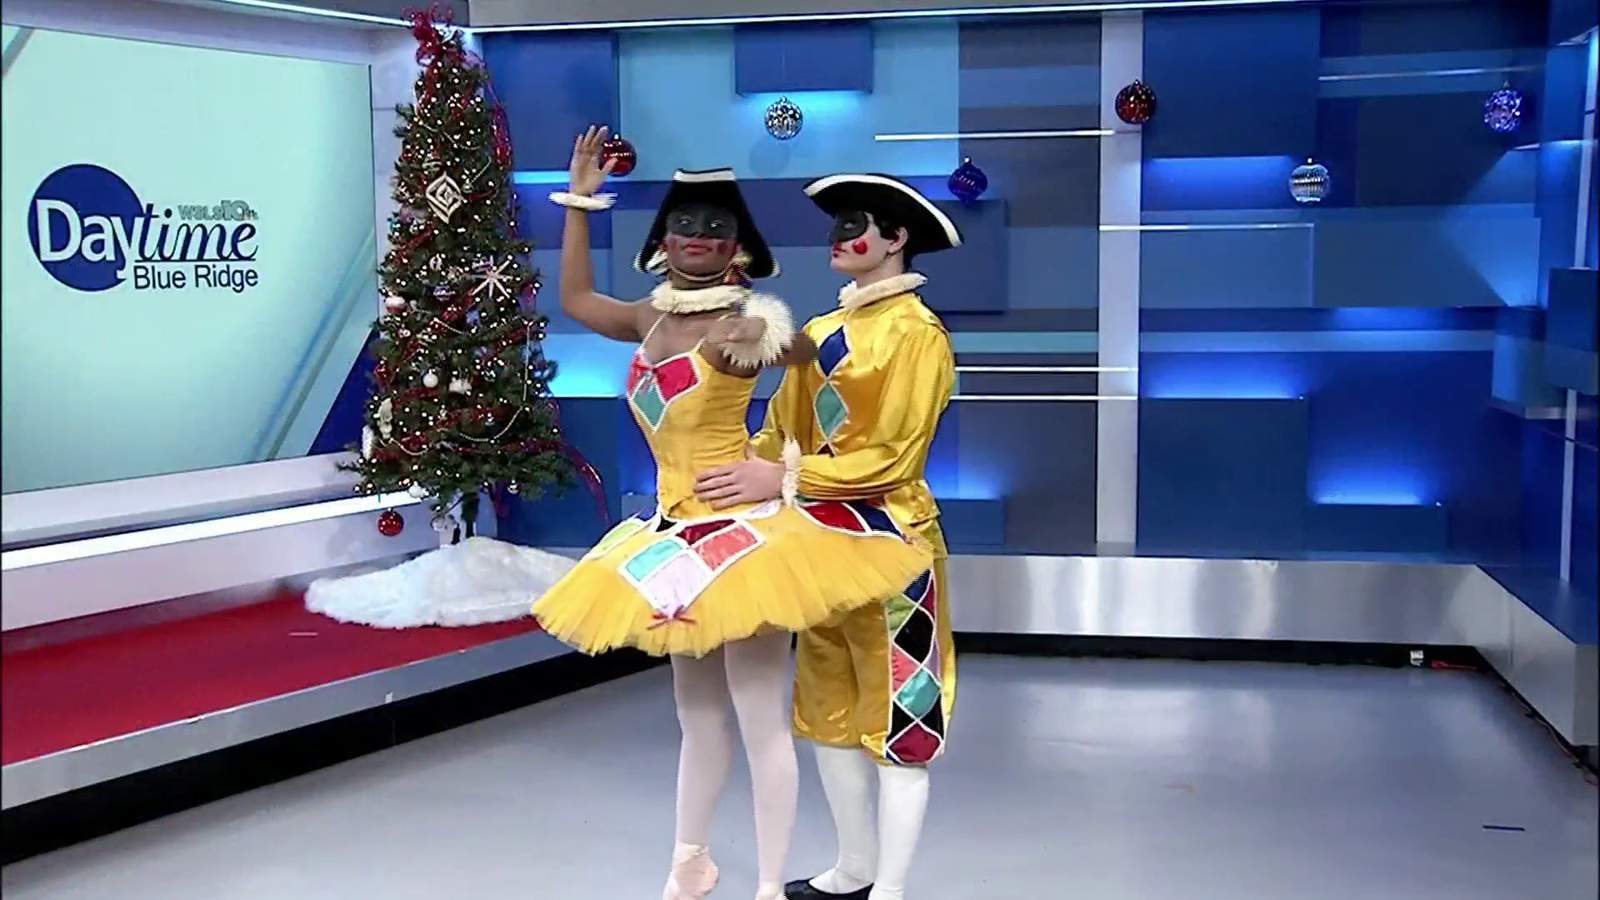 The Nutcracker kicks off this weekend at The Berglund Center